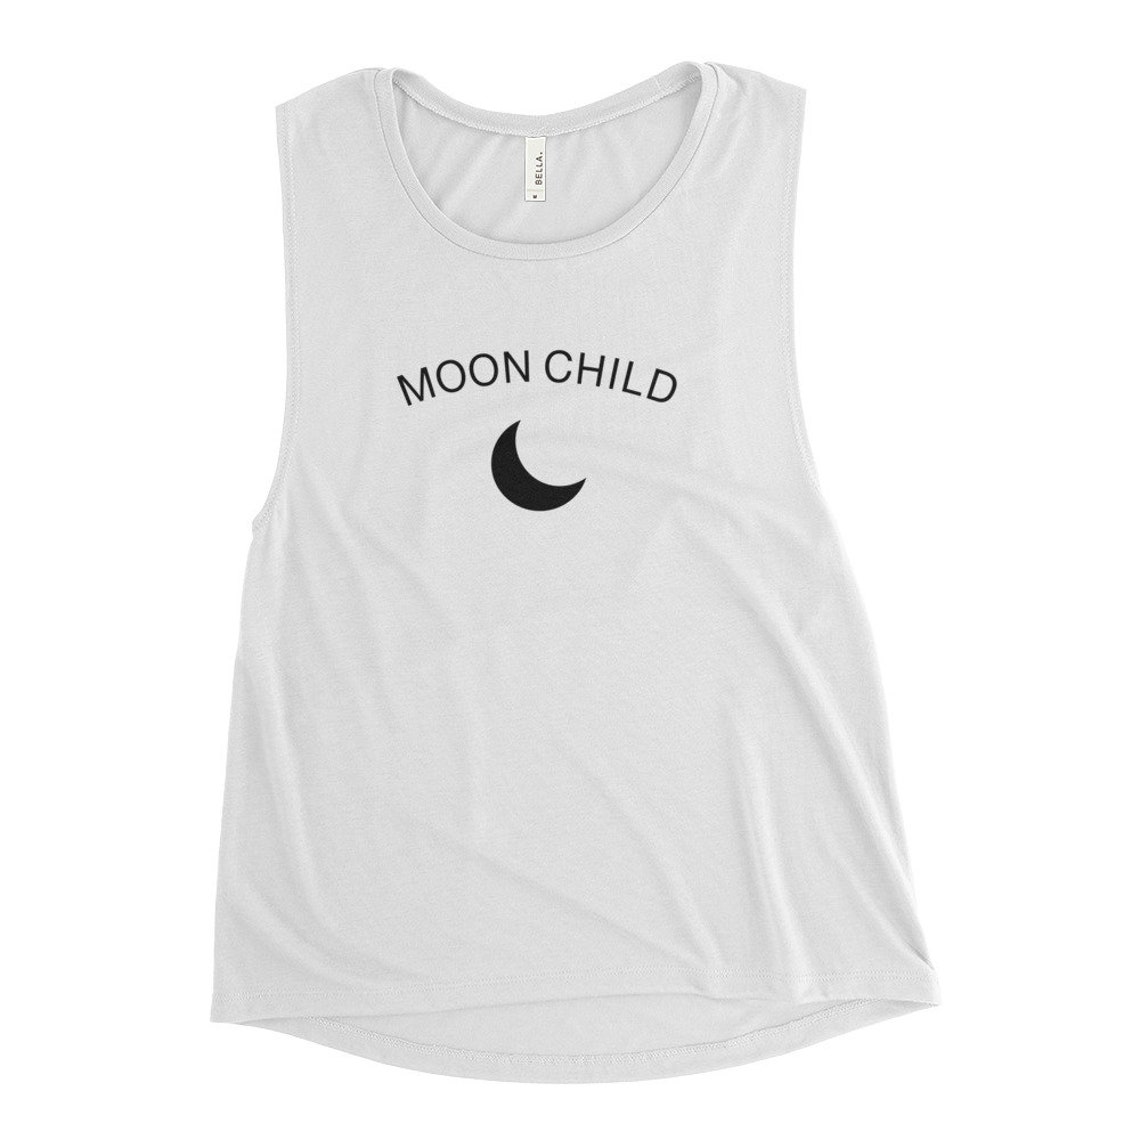 Moon Child Tank Top Muscle Tank Sleeveless Tops and Tees | Etsy